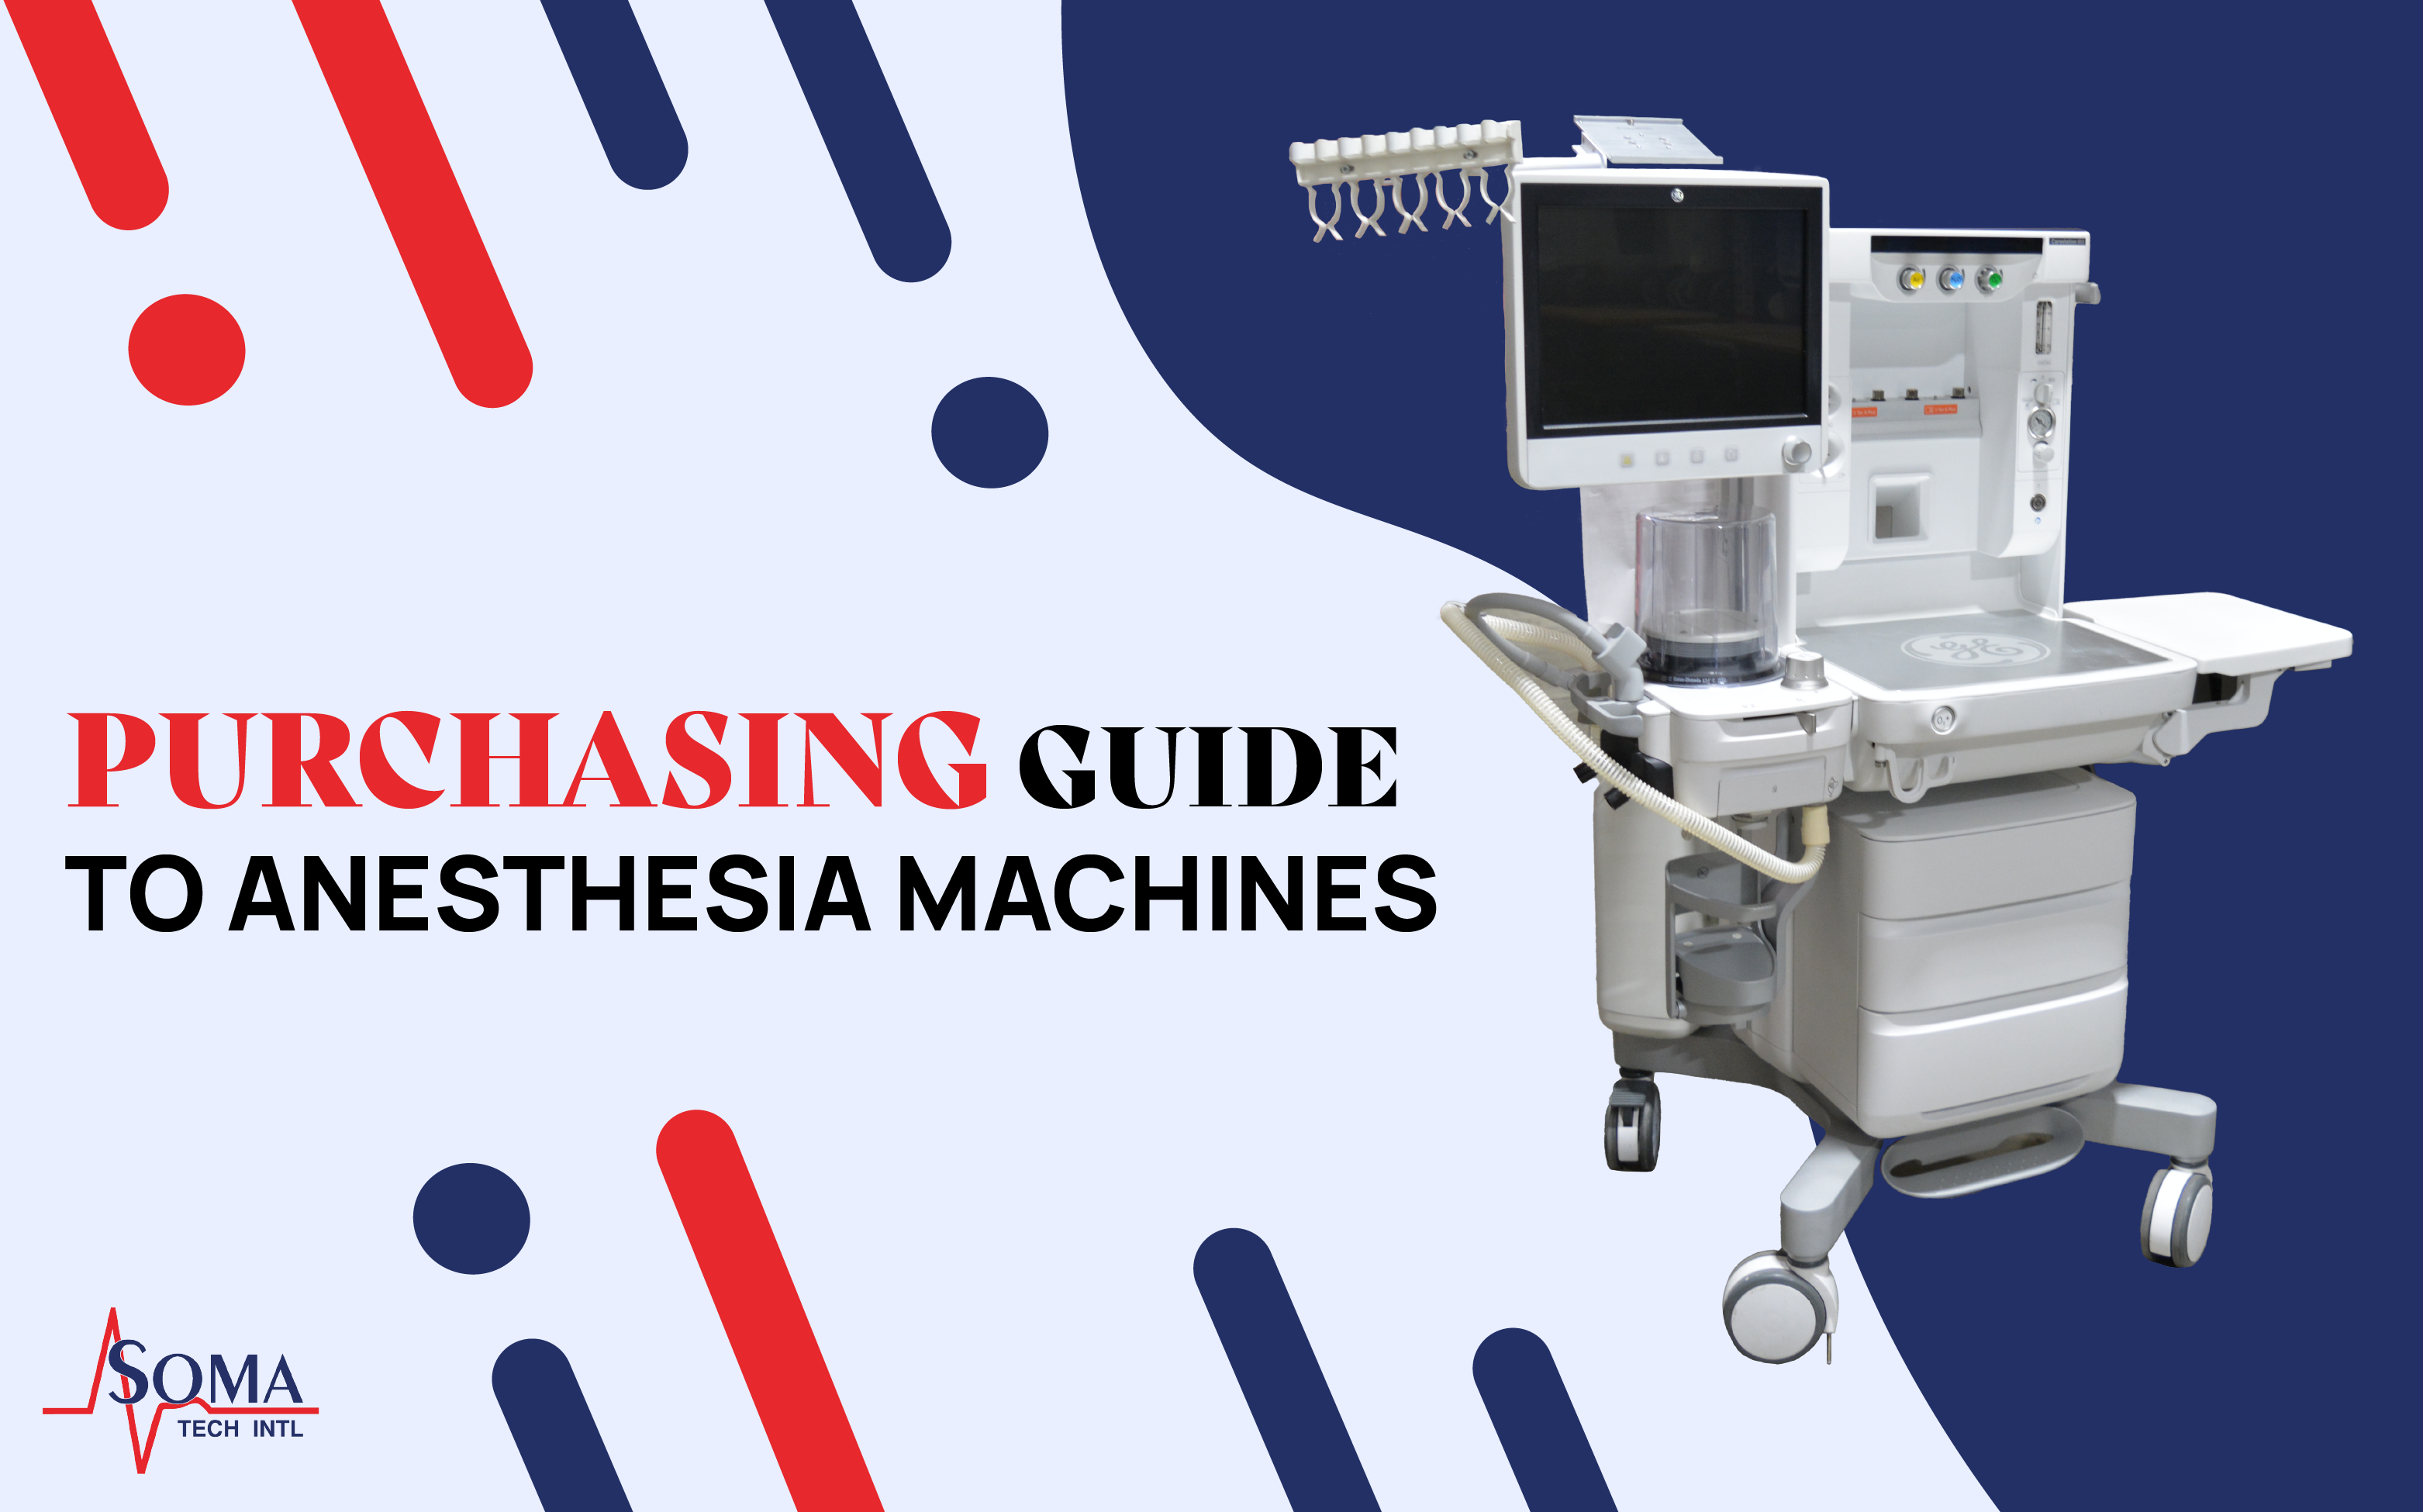 Purchasing Guide to Anesthesia Machines